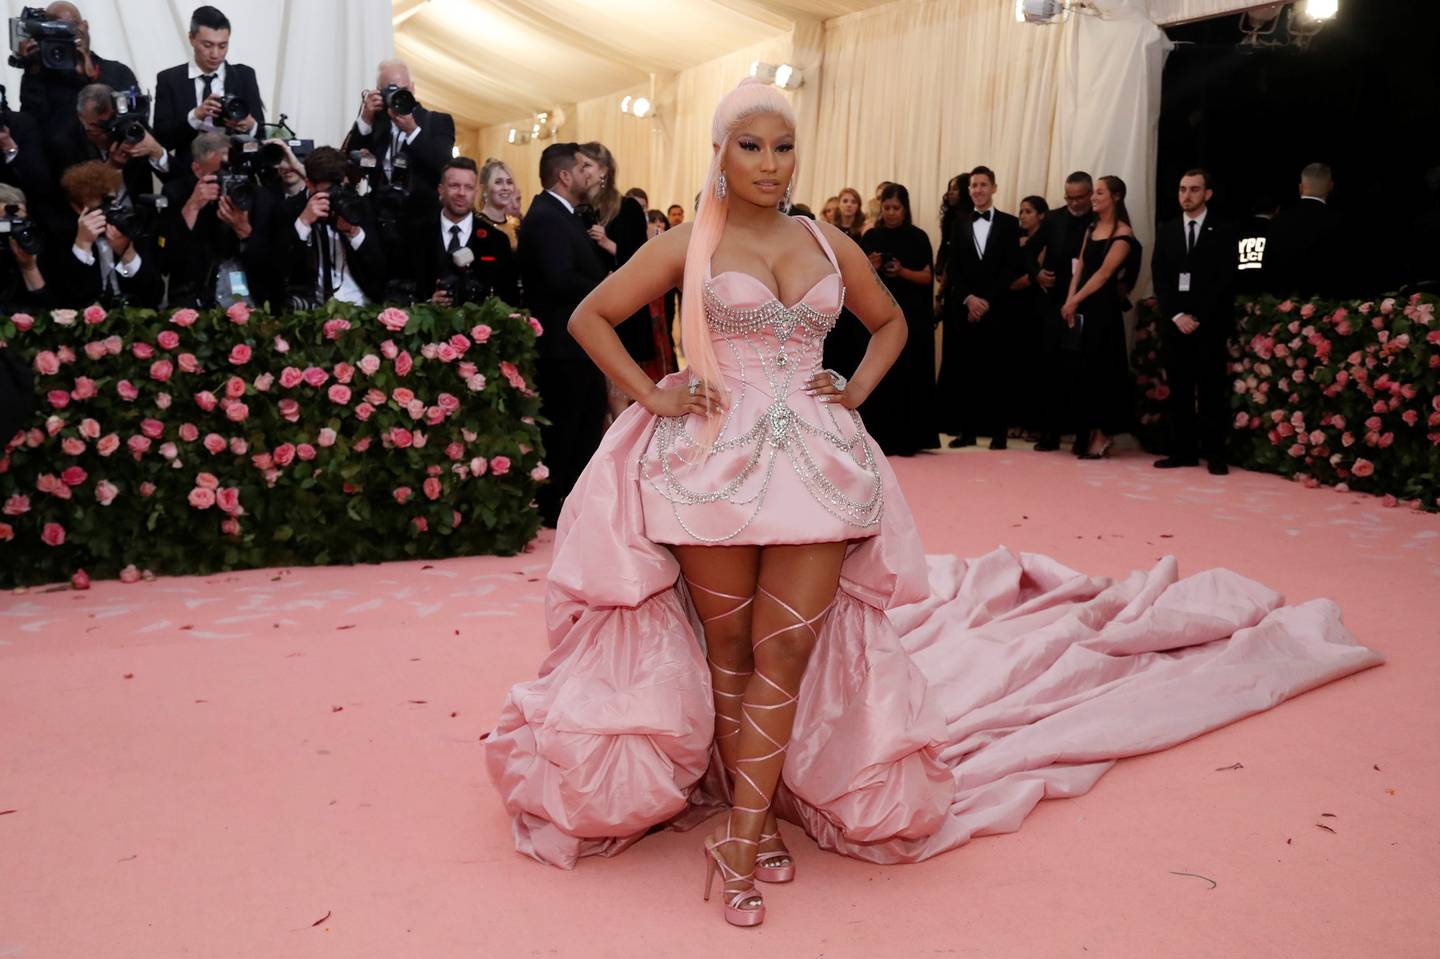 Nicki Minaj is one of several high-profile guests that have spent a night at Raffles Dubai. Reuters / Mario Anzuoni / File Photo